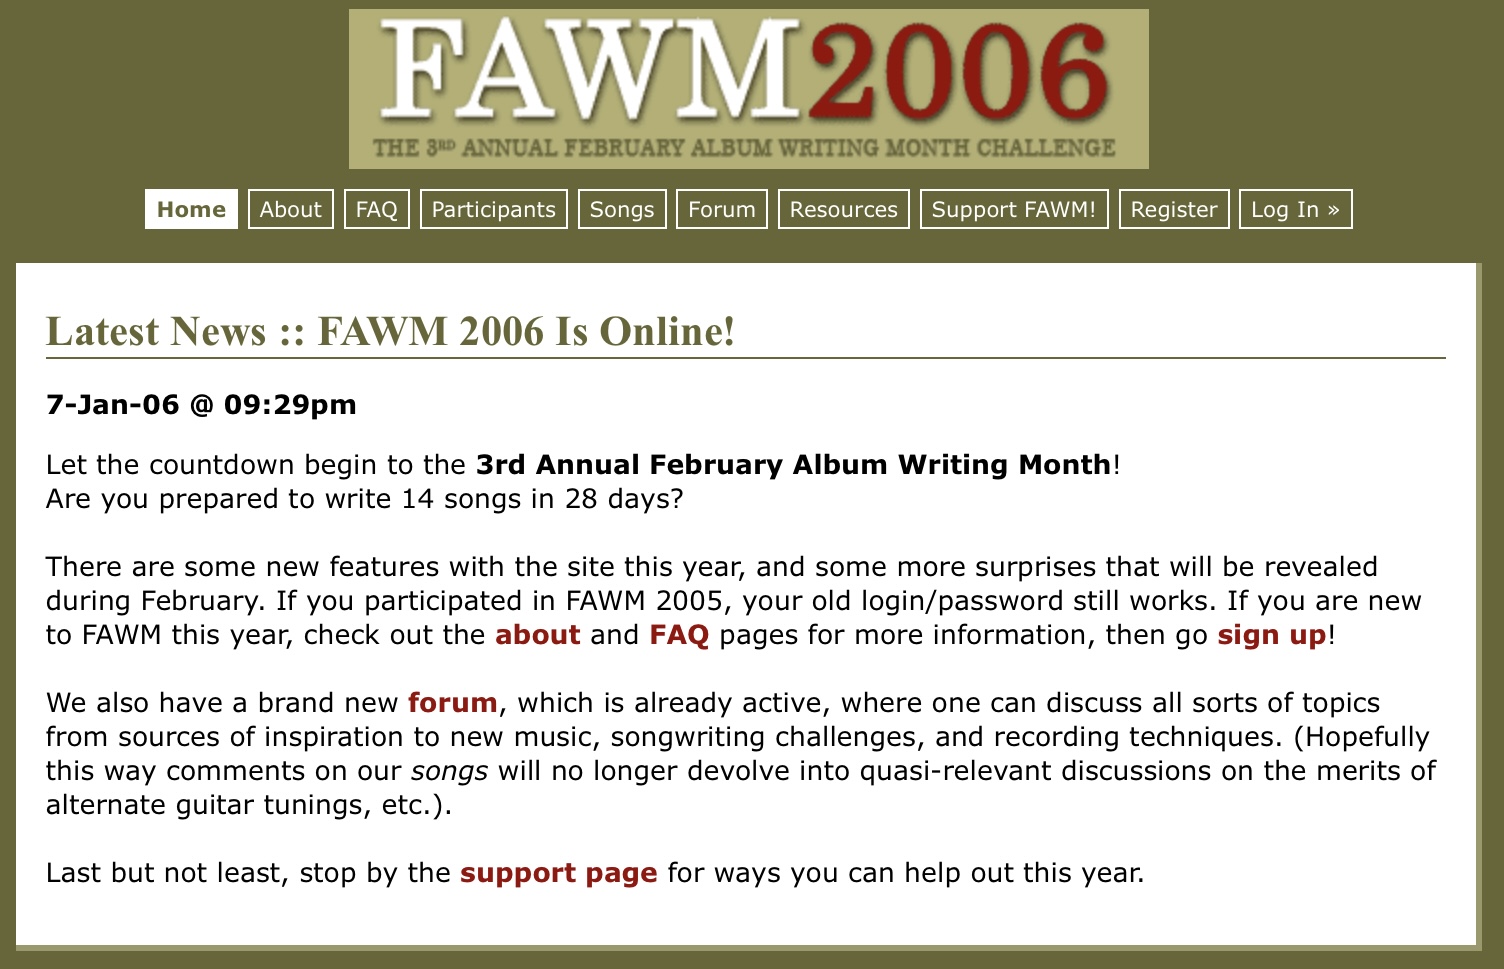 fawm2006 site 3rd anual February Album Writing Month